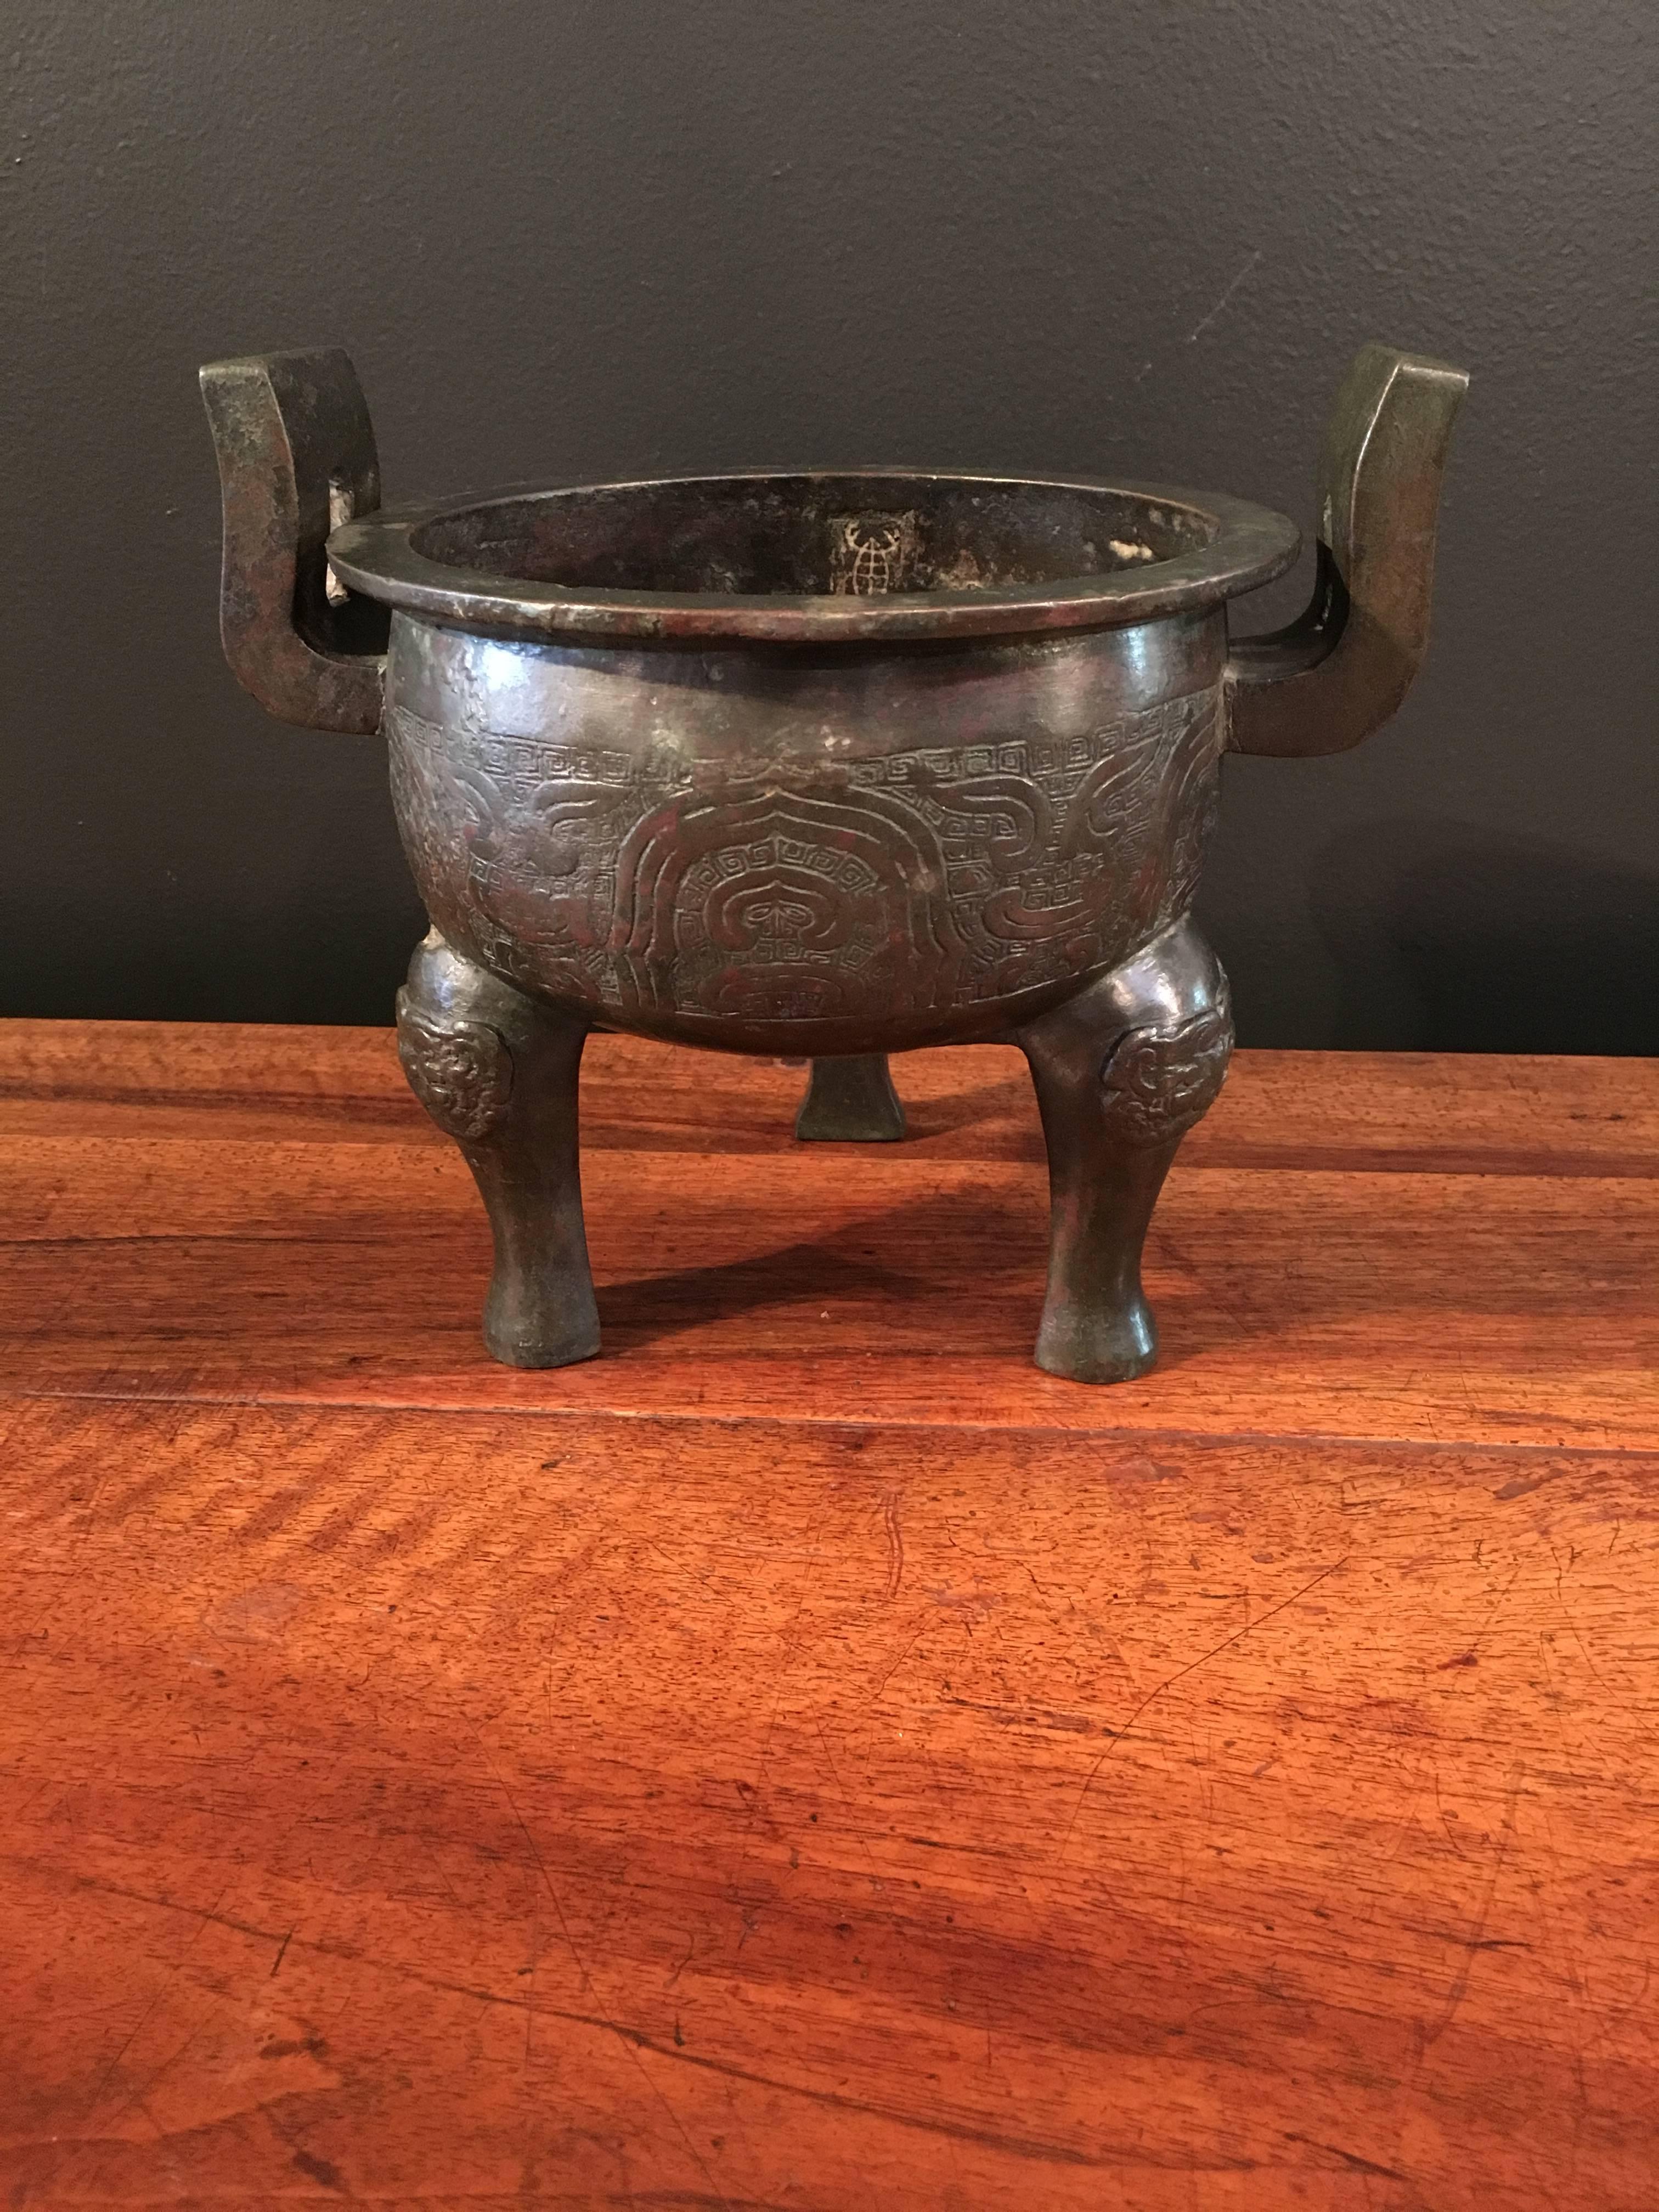 The tripod vessel is heavily cast and features animal mask legs and two large upturned handles. The scrolling archaic design of a stylized dragon upon a lewen ground.
An attractive patina of dark red, green and brown lacquer, with areas of natural